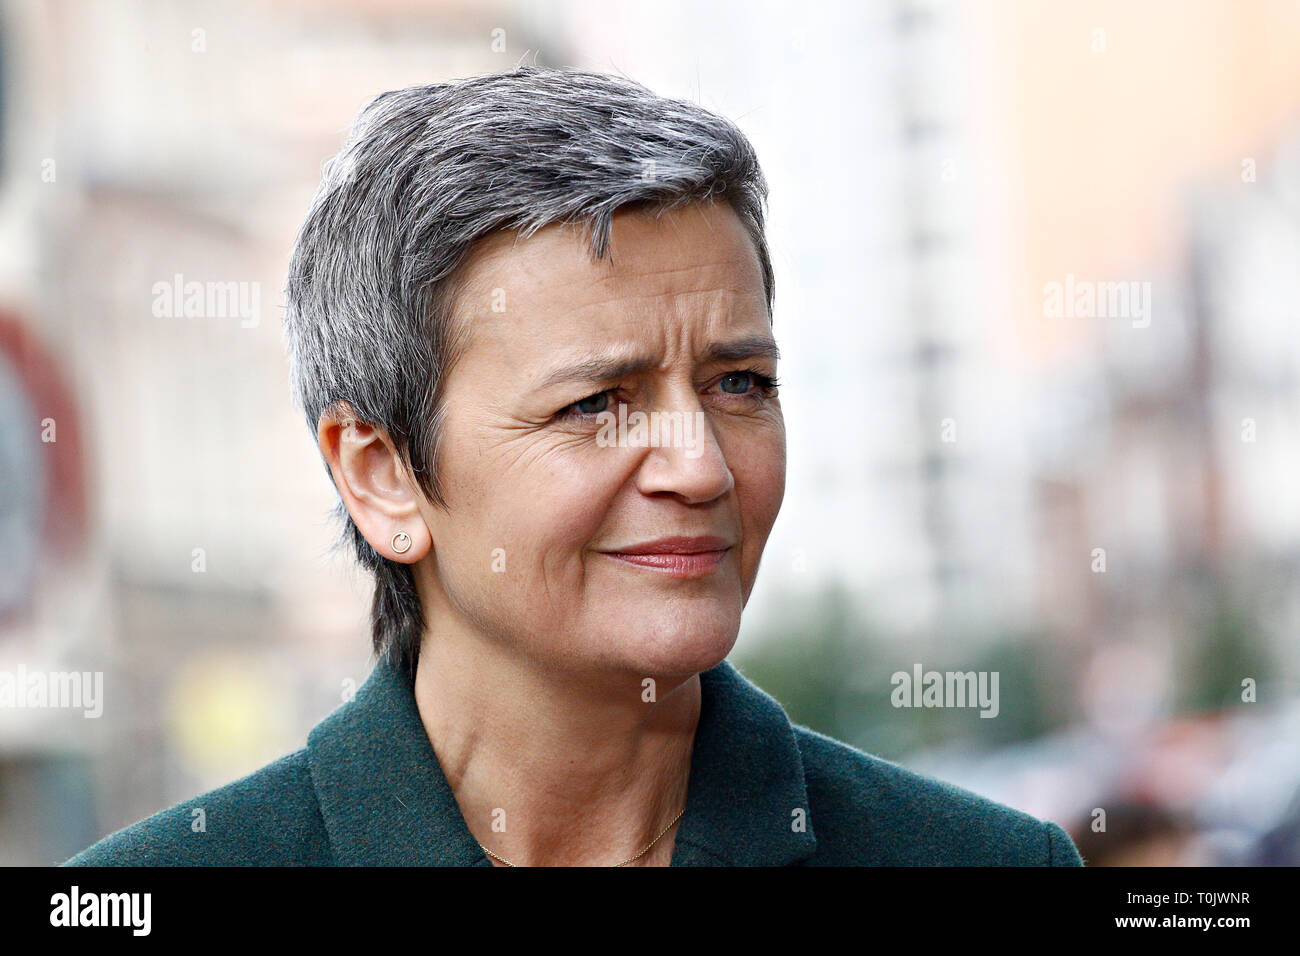 Brussels, Belgium. 20th March 2019.EU Commissioner for Competition Margrethe Vestager speaks to media on the concurrence case with Google online search advertising . Credit: ALEXANDROS MICHAILIDIS/Alamy Live News Stock Photo